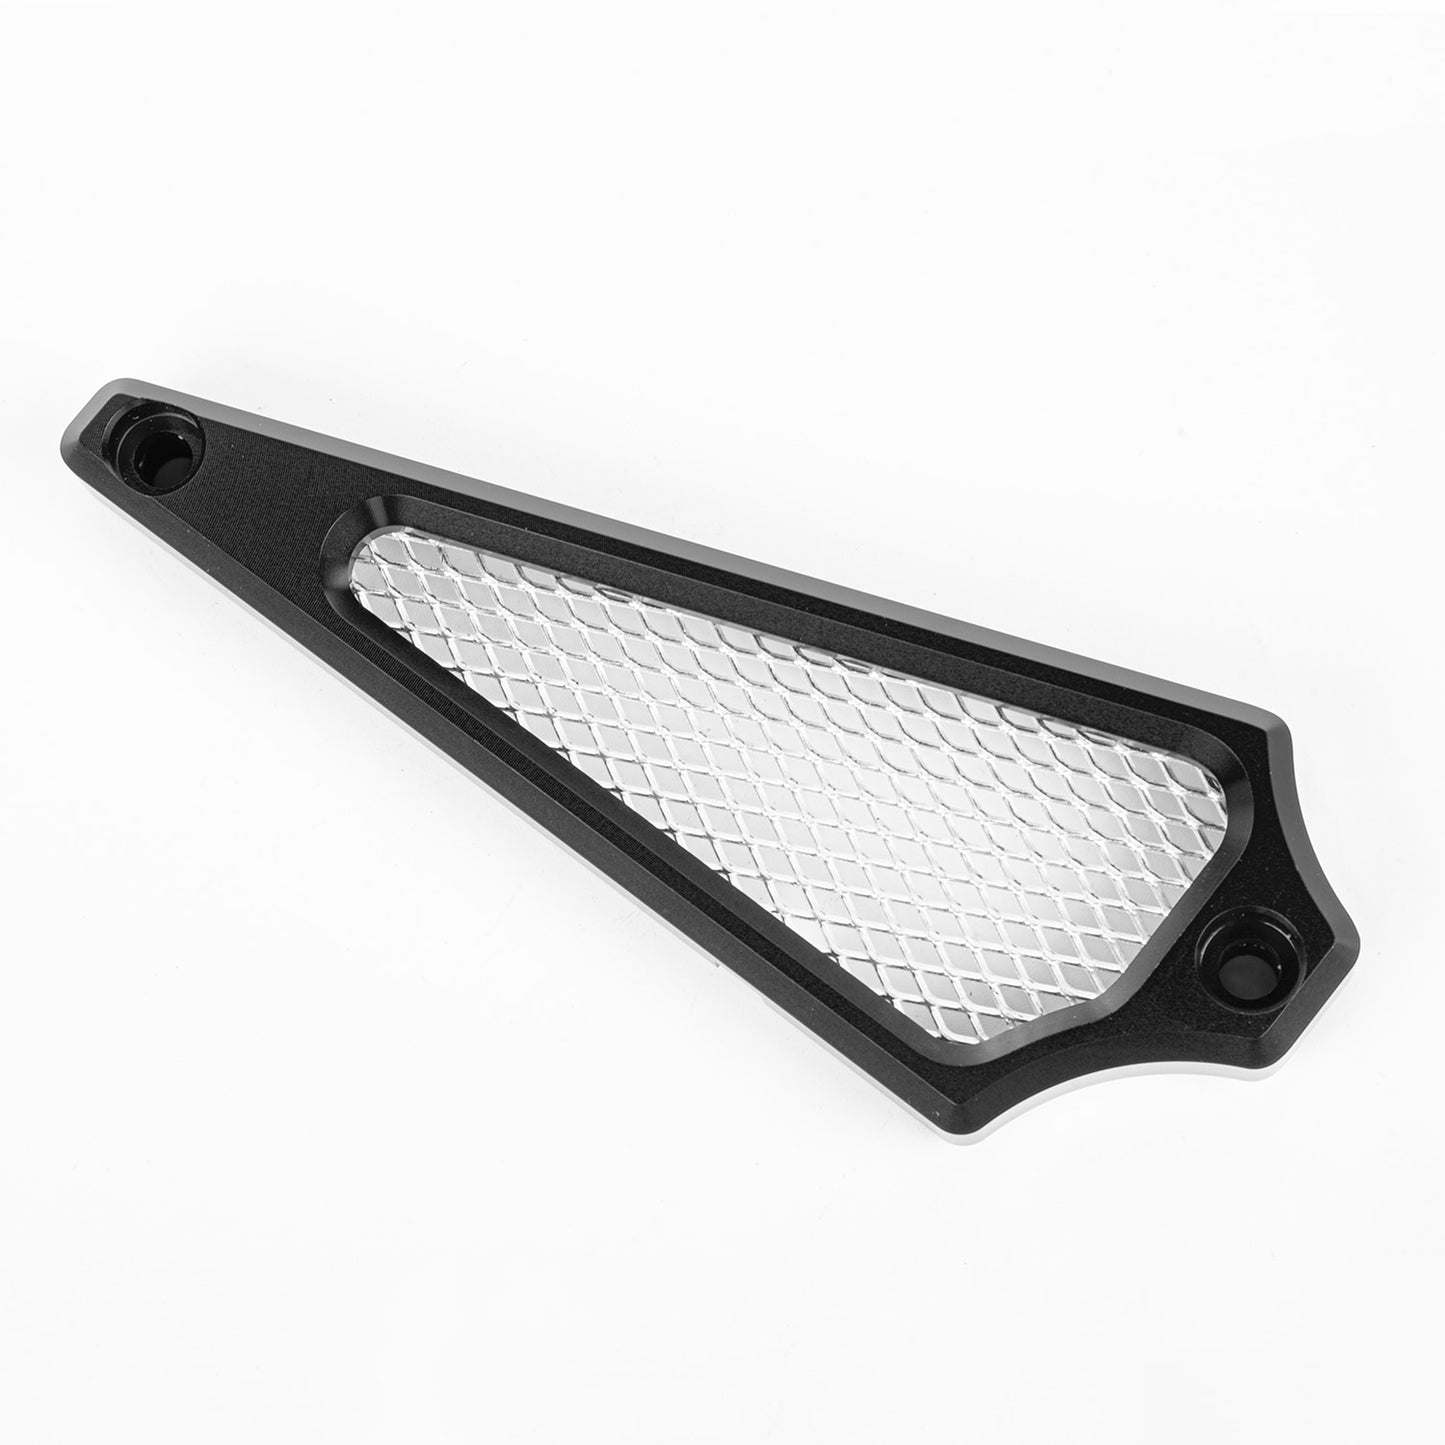 Wolfline XDiavel Motorcycle Frame Side Cover Mesh Net Vertical Air Intake Grill For Ducati XDiavel S 2016 2017 2018 2020 2021 2022 2023